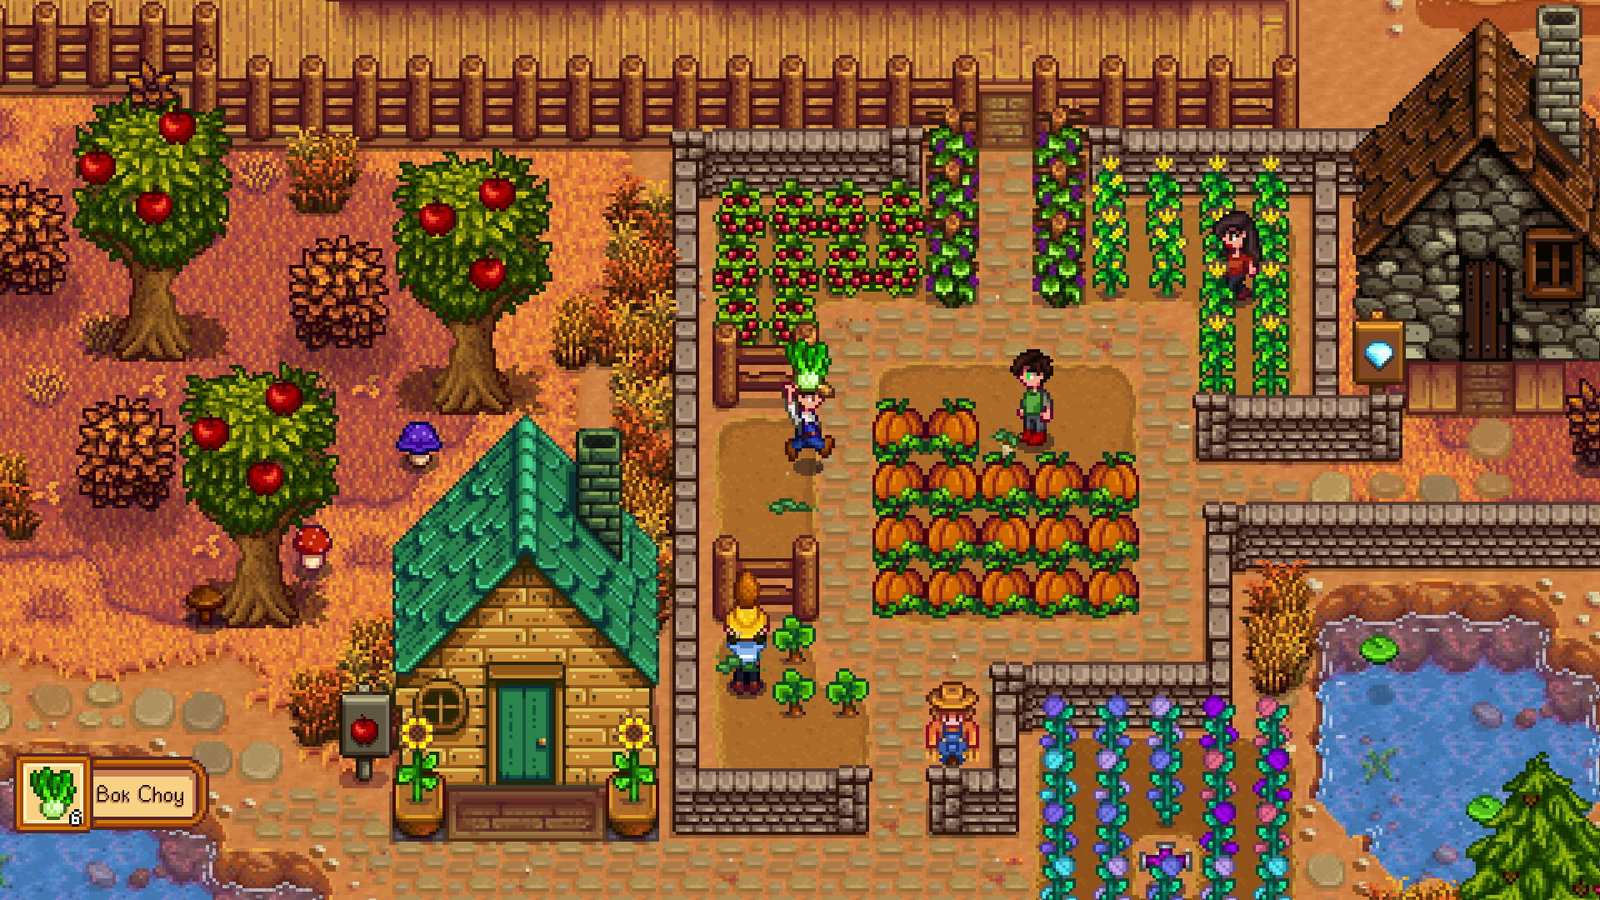 You can play Stardew Valley multiplayer right now